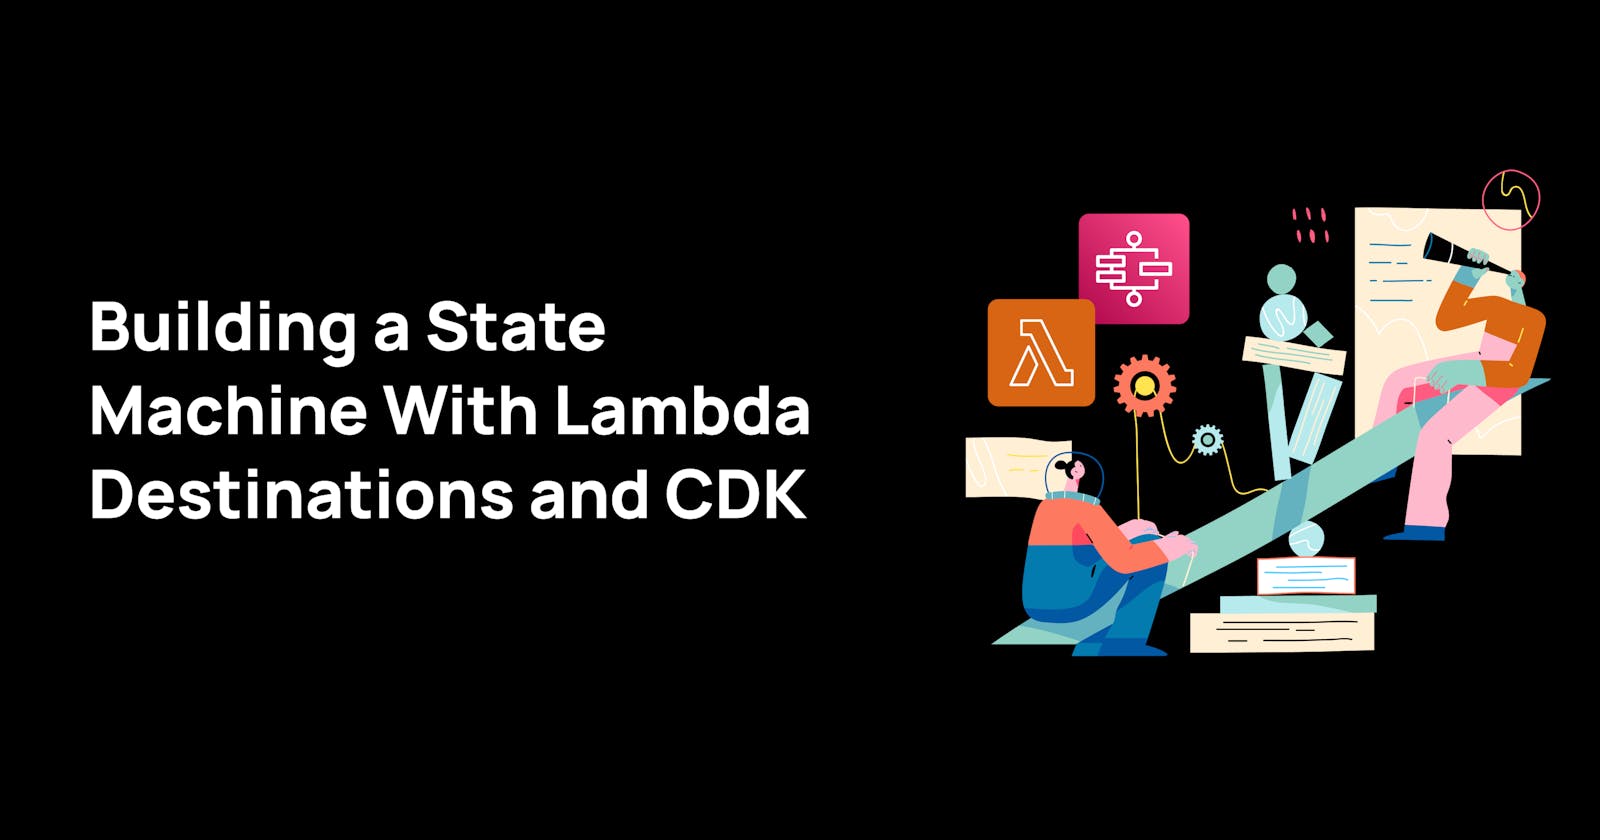 Building a State Machine With Lambda Destinations and CDK